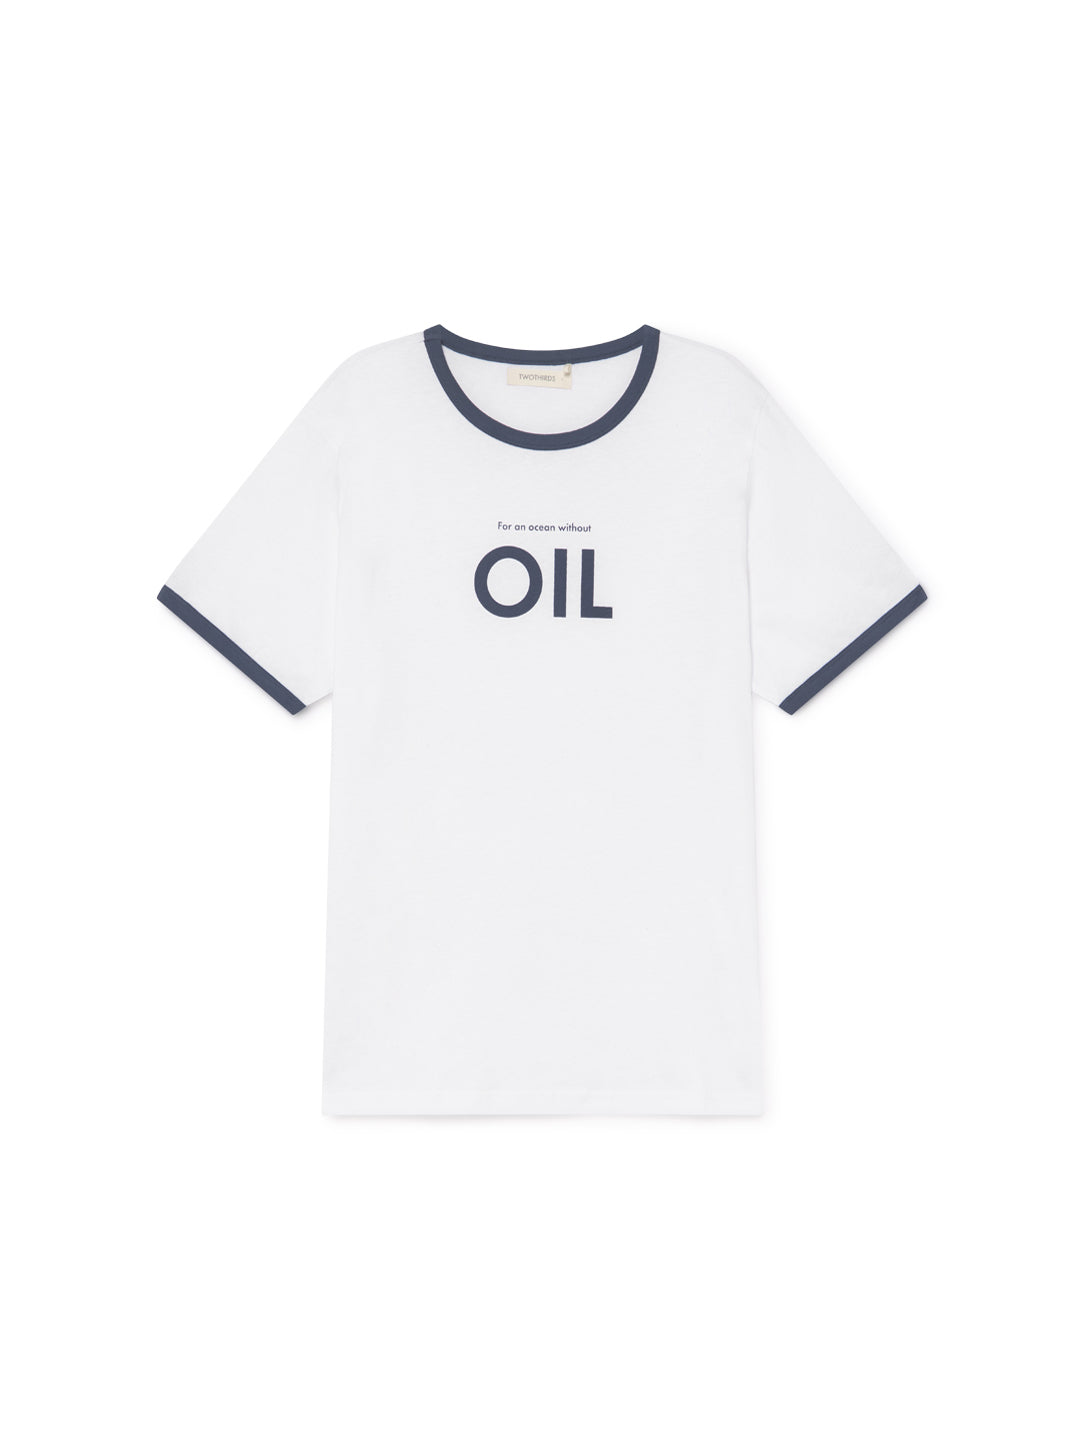 TWOTHIRDS Mens Tee: Thunberg - OIL front